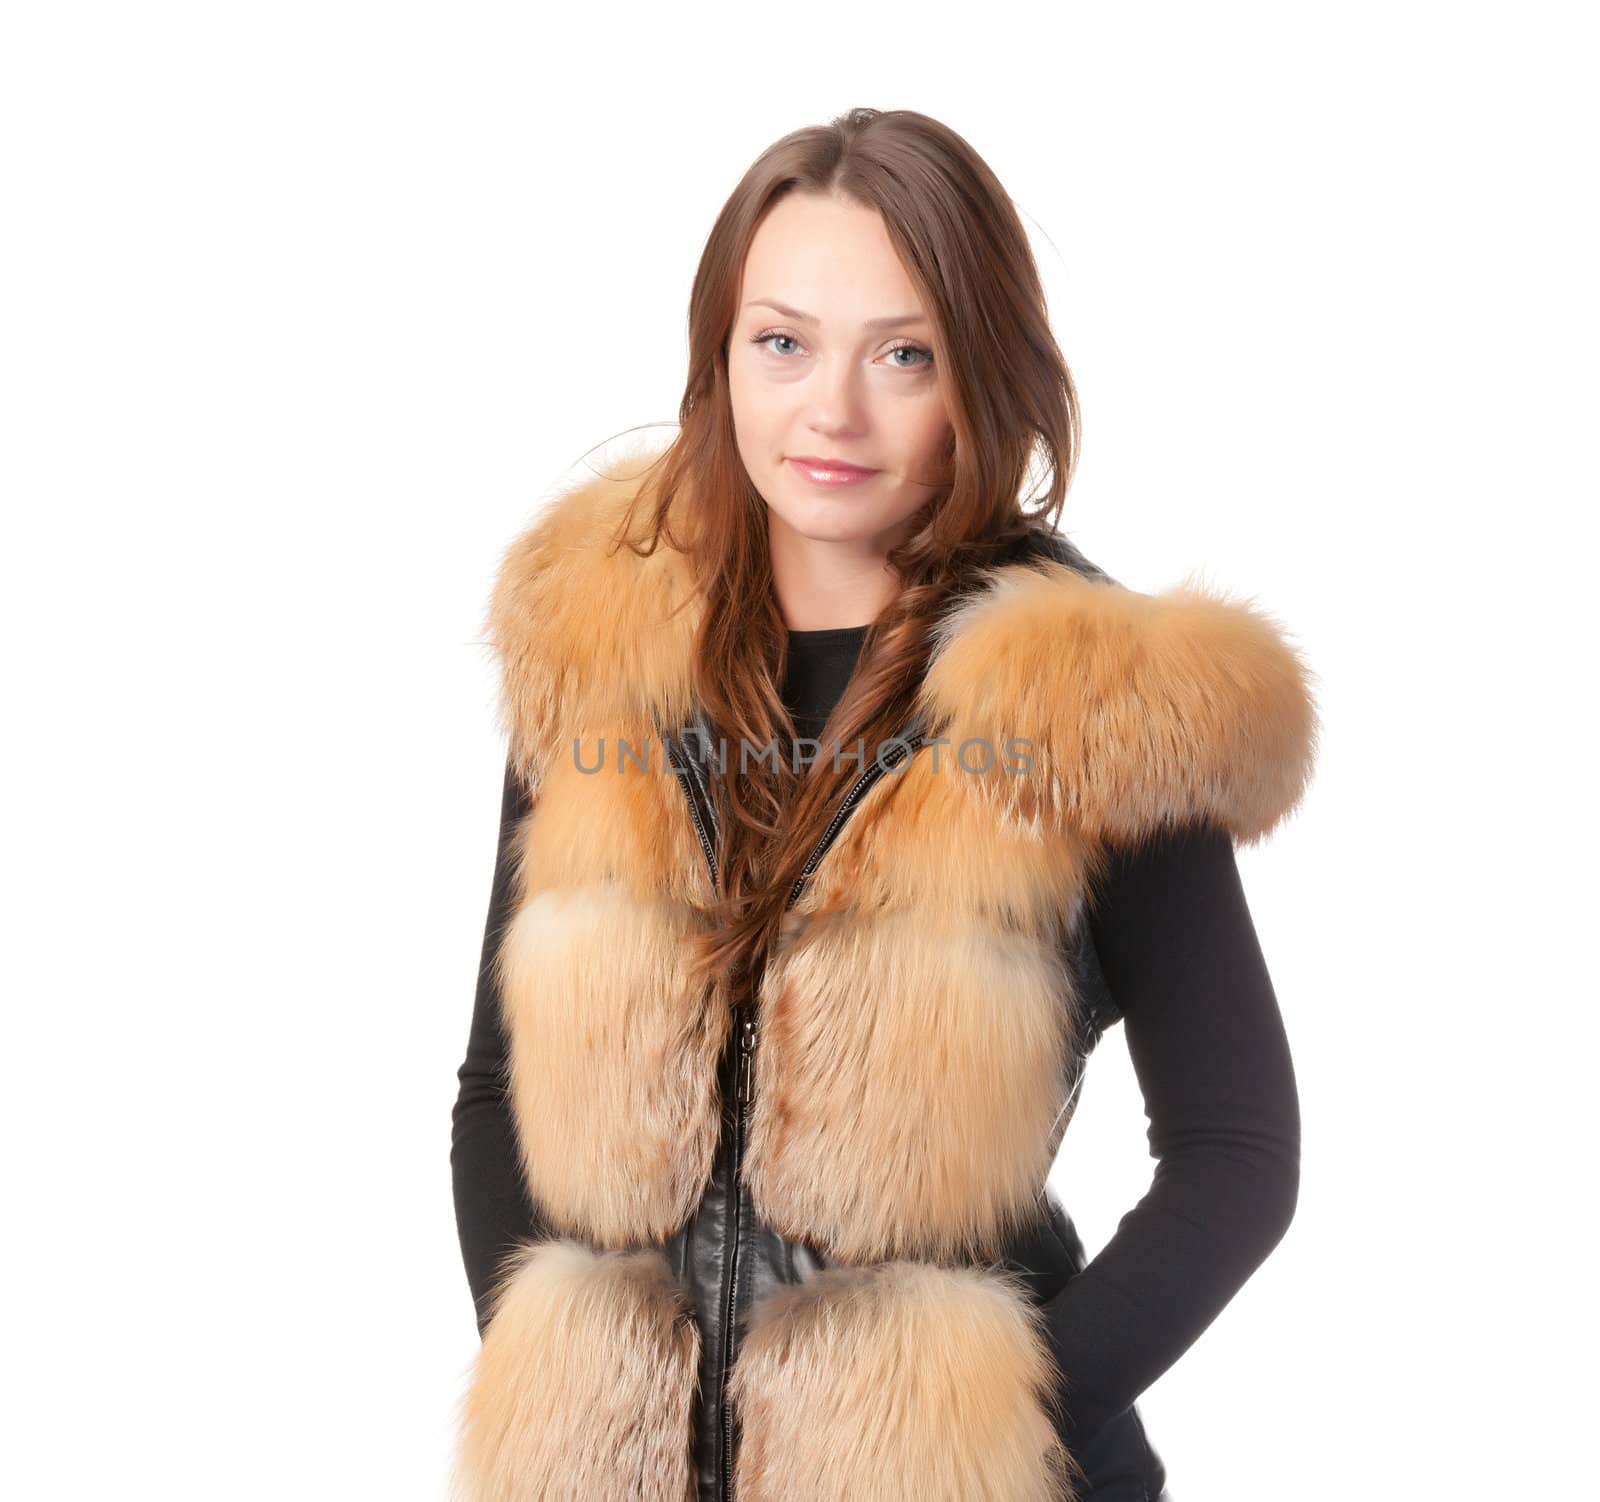 Stylish relaxed young woman in winter fur jacket standing with her hands in her pocket isolated on white